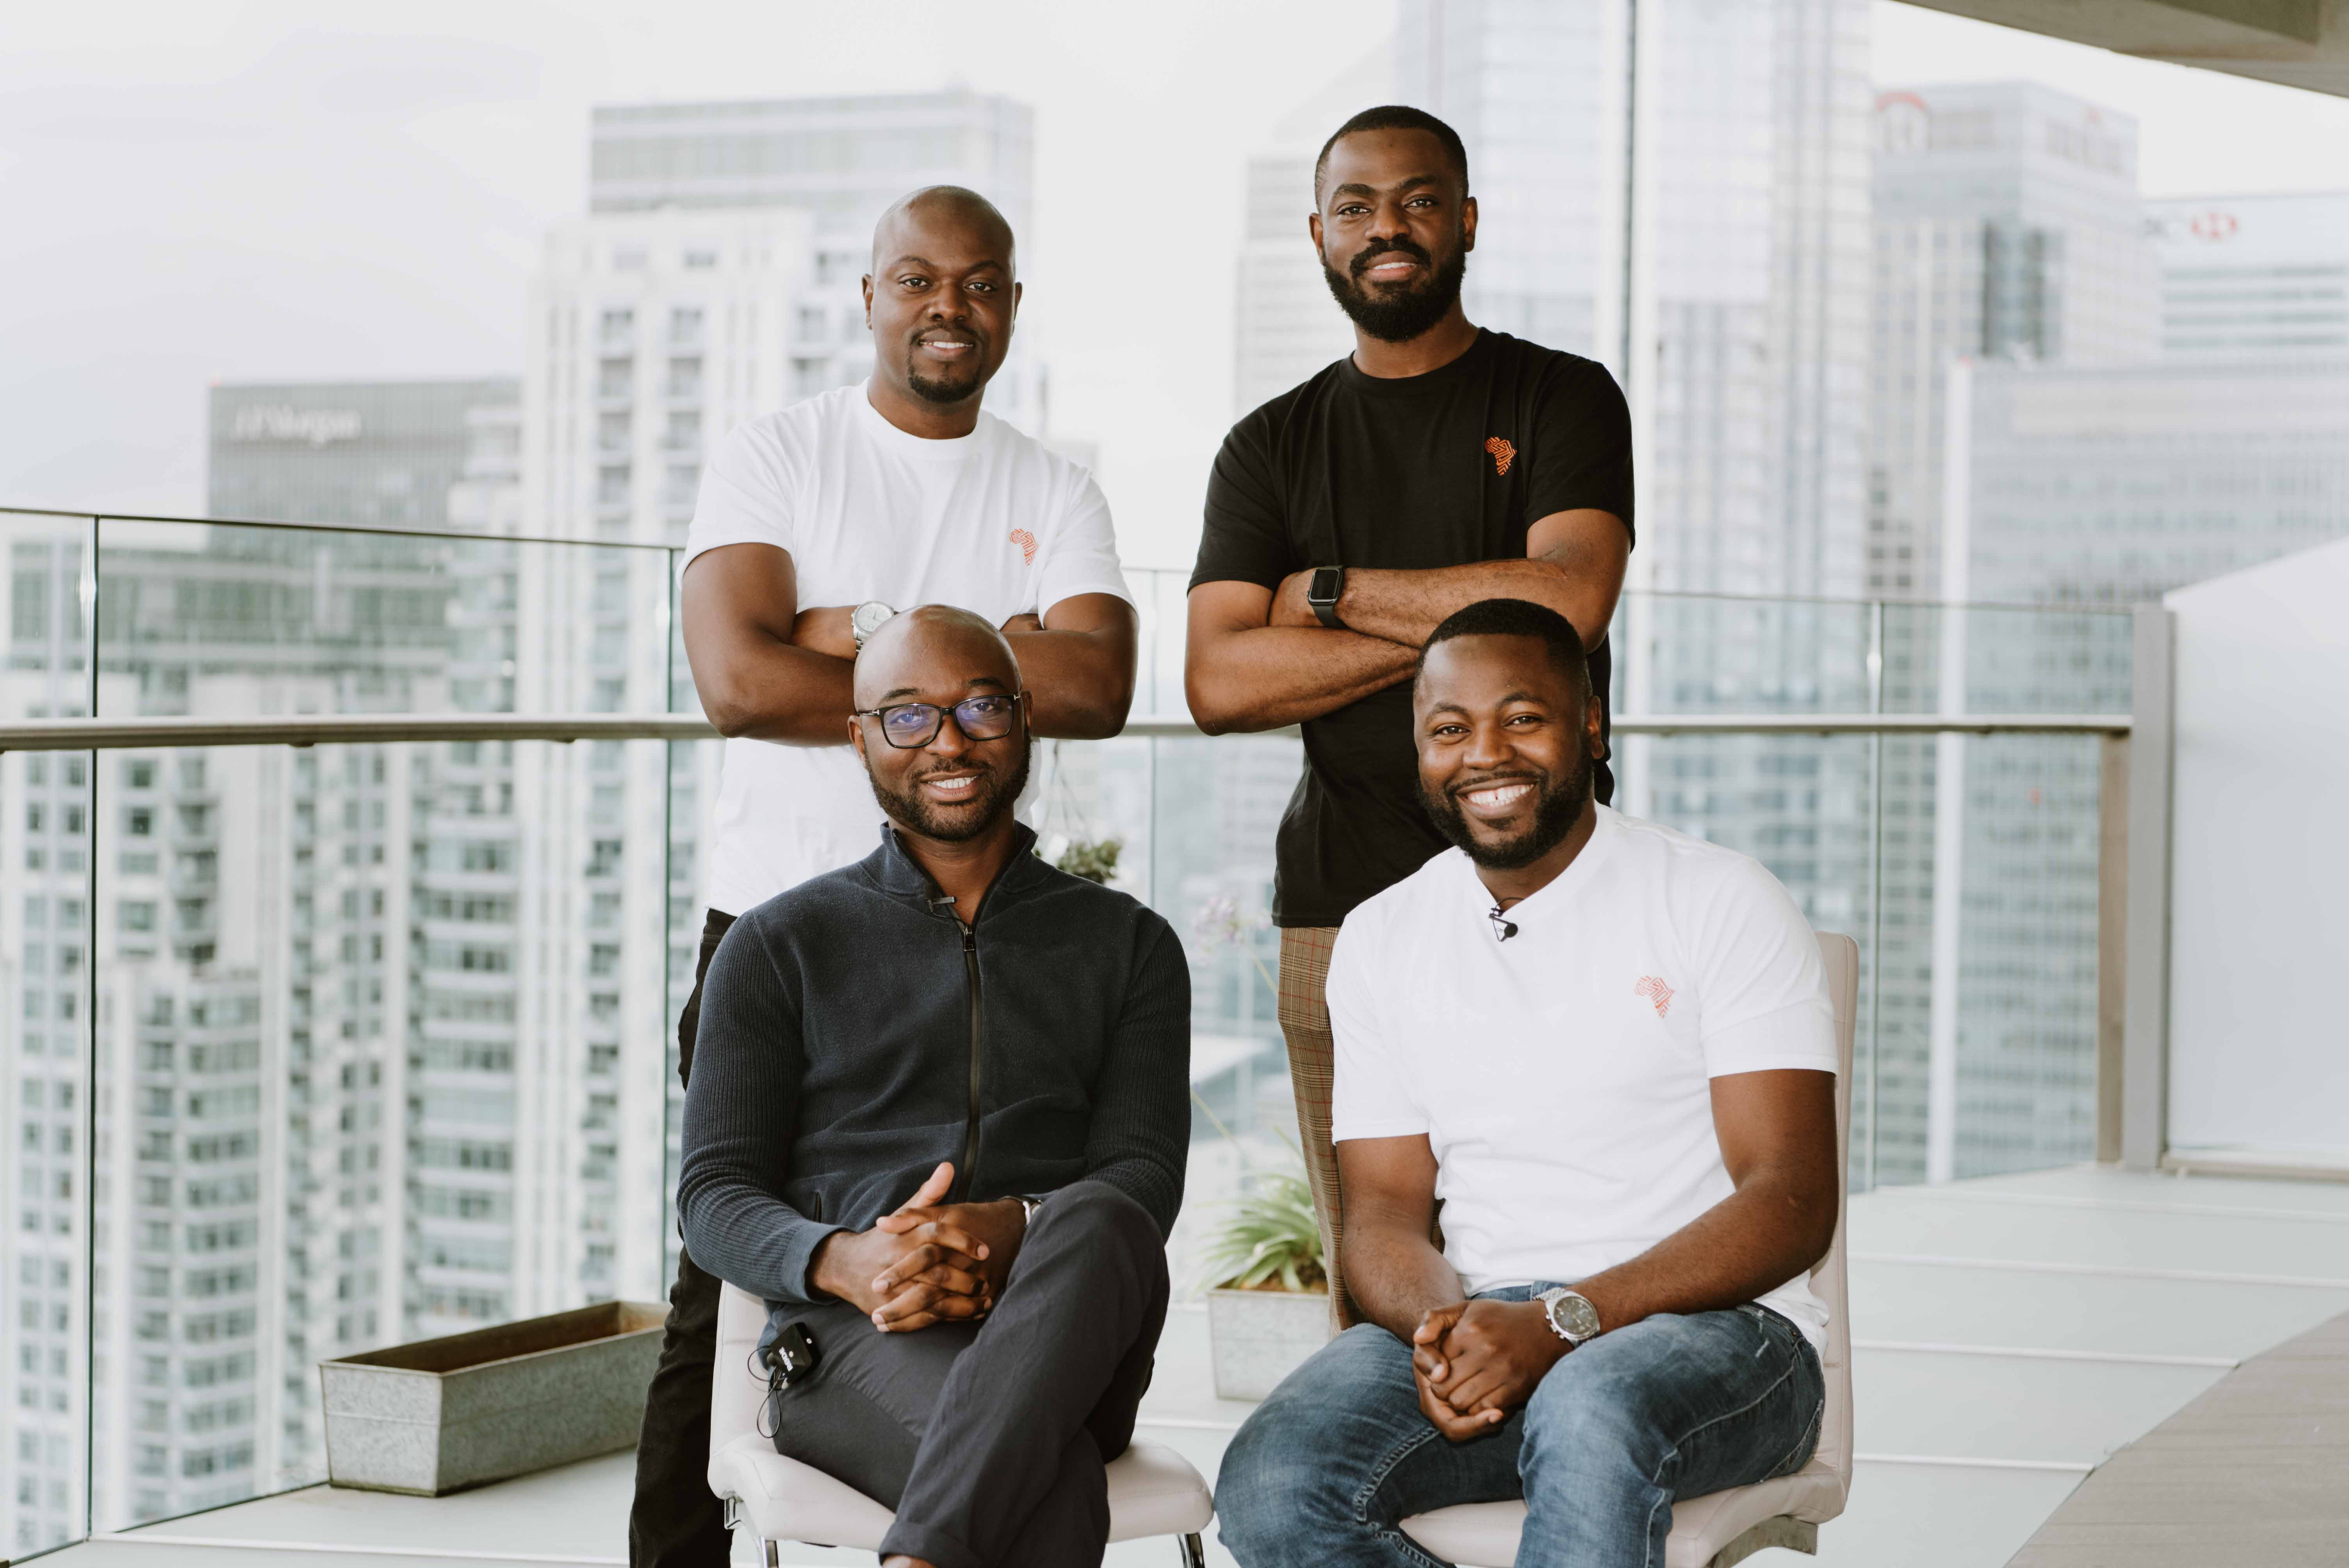 African-focused fintech, Zazuu raises $2m to solve inconsistencies in cross-border payments